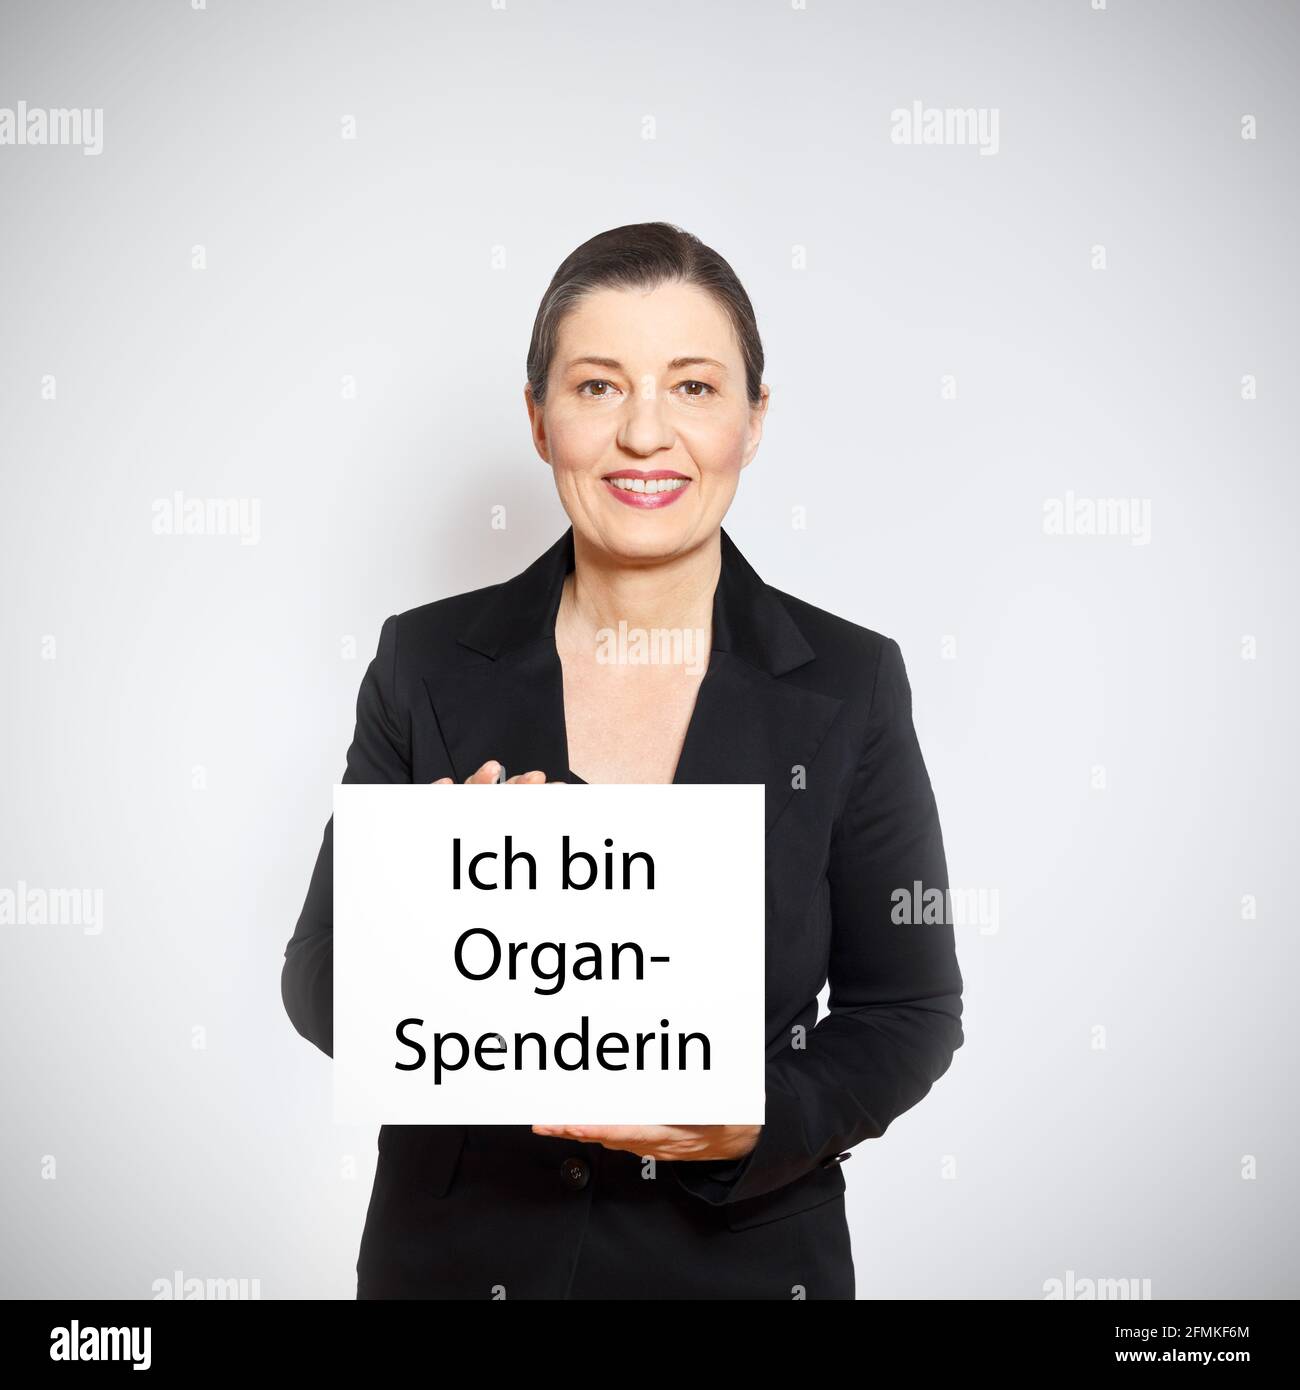 Organ donation concept: mature woman holding up a white sign with the text I am an organ donor in german. Stock Photo